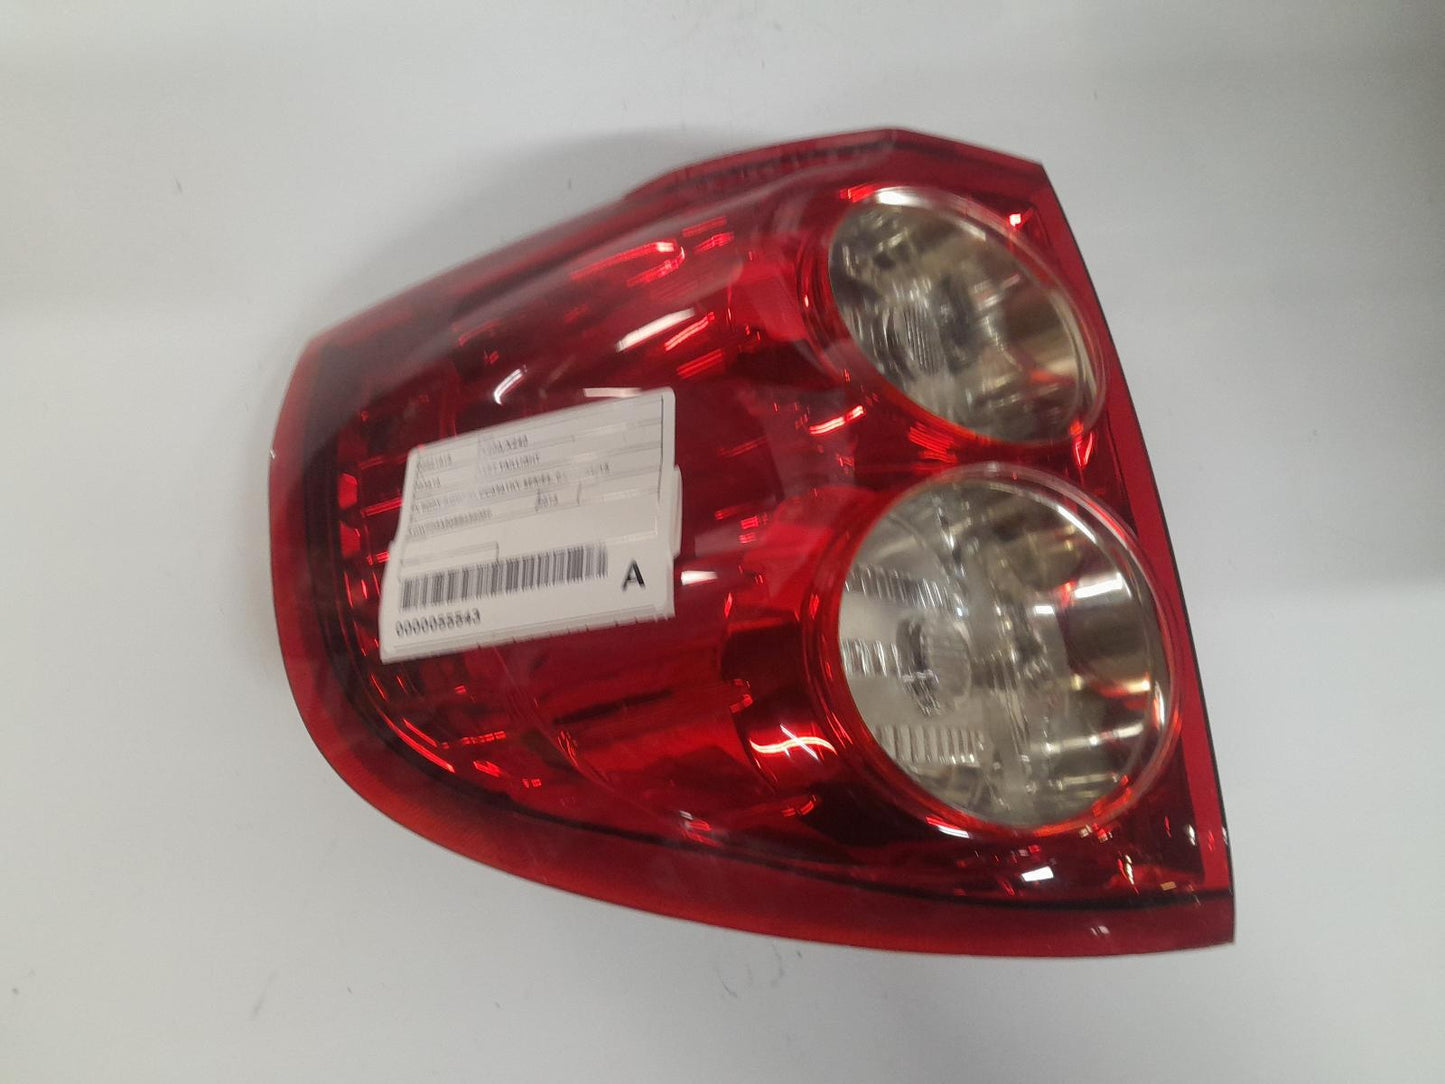 GREAT WALL X200/X240 LEFT TAILLIGHT IN BODY (LOWER), CC6461KY SERIES, 04/11-01/15